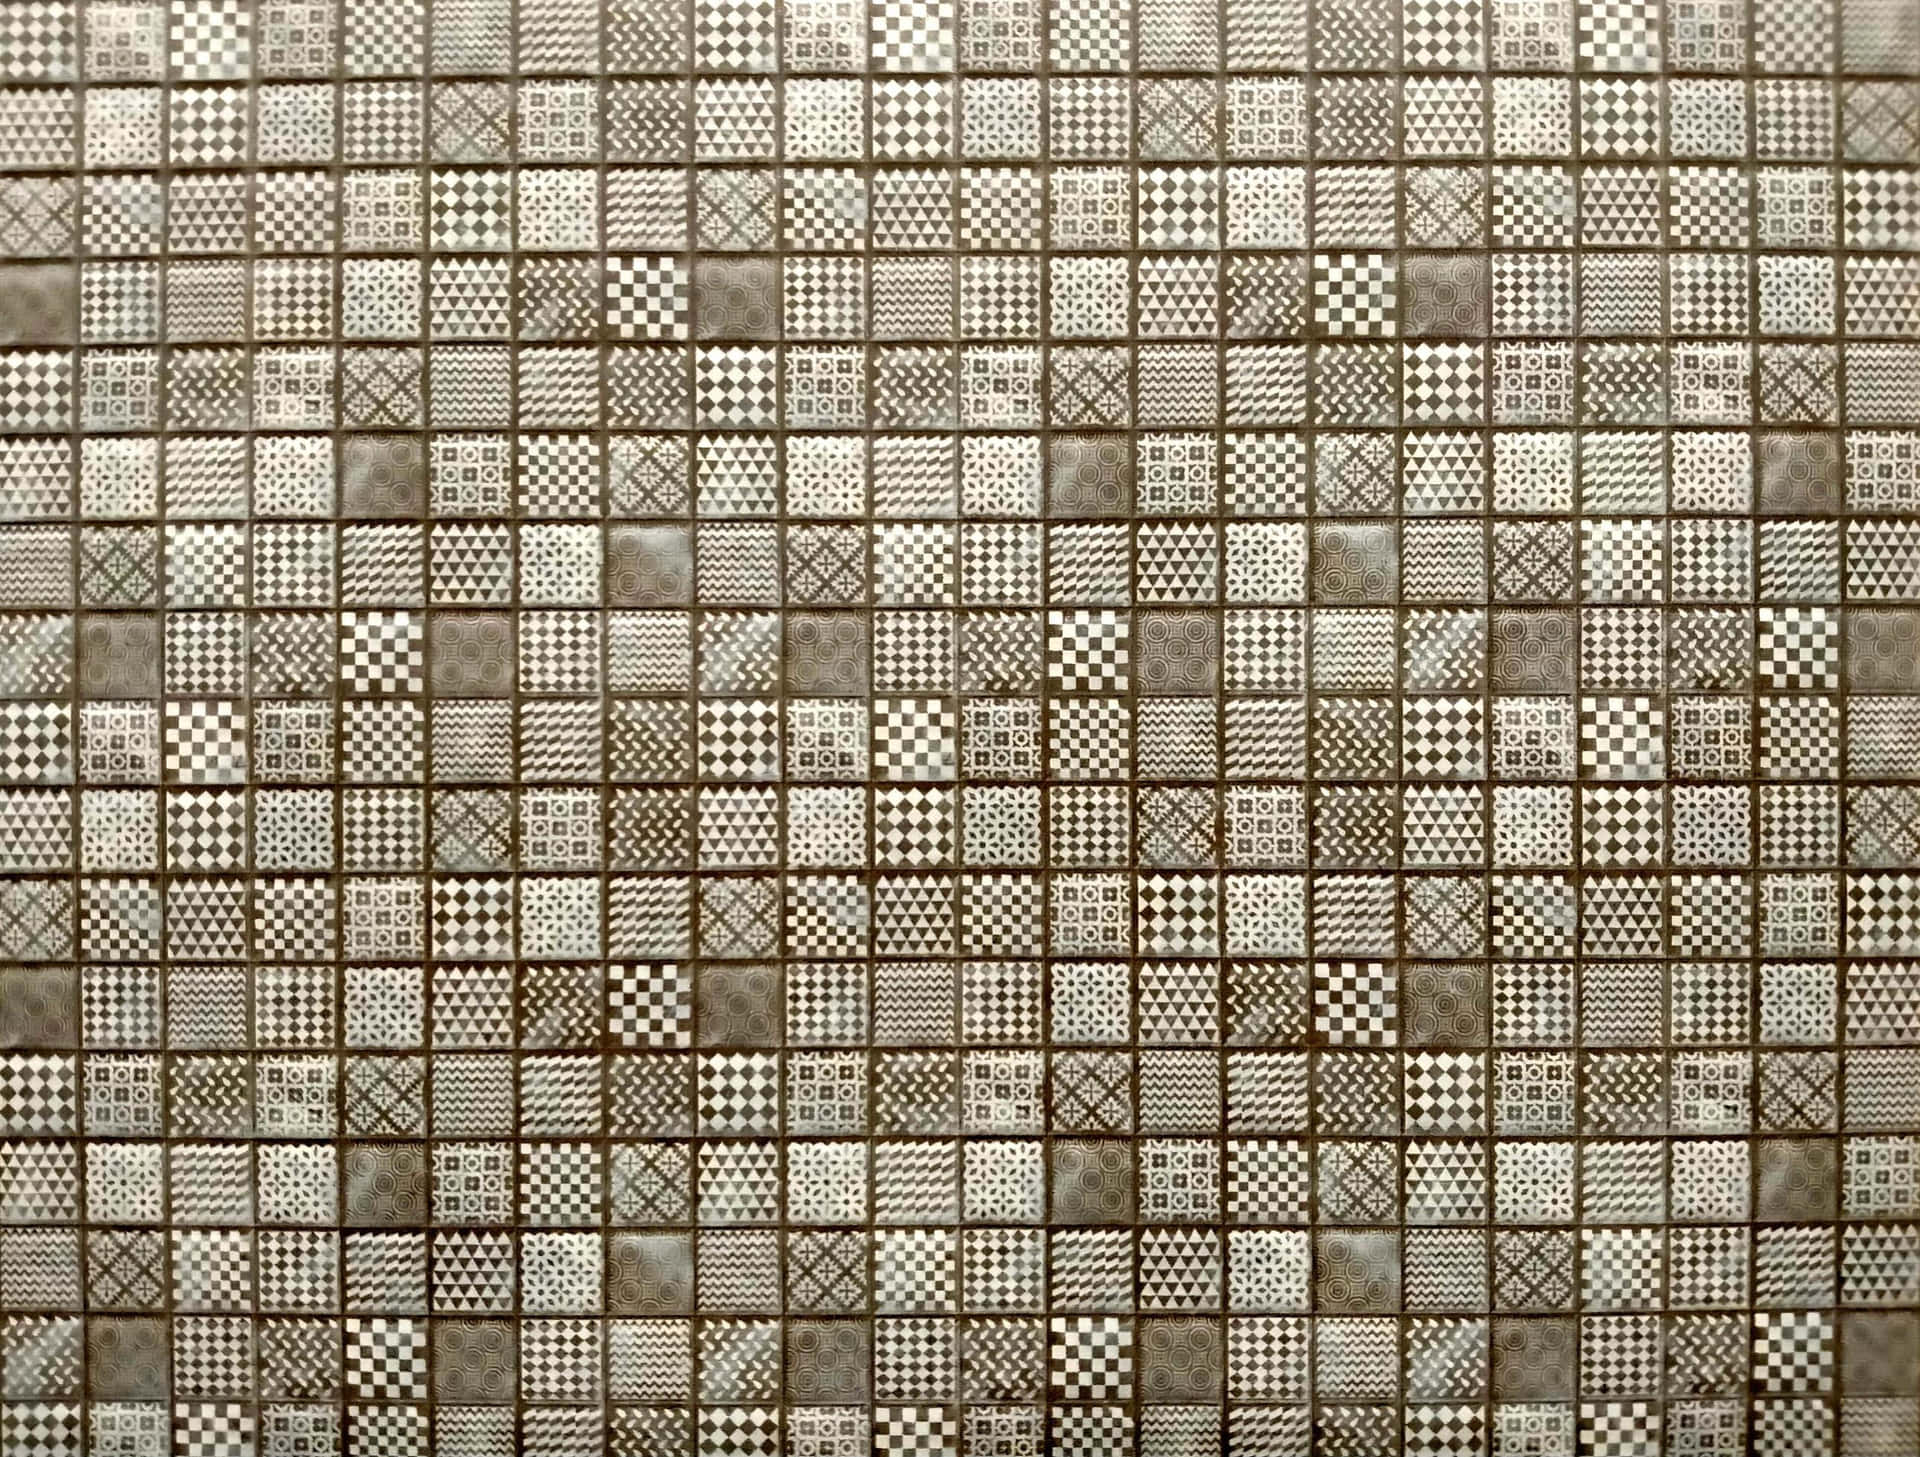 A Tile With A Pattern Of Squares And Dots